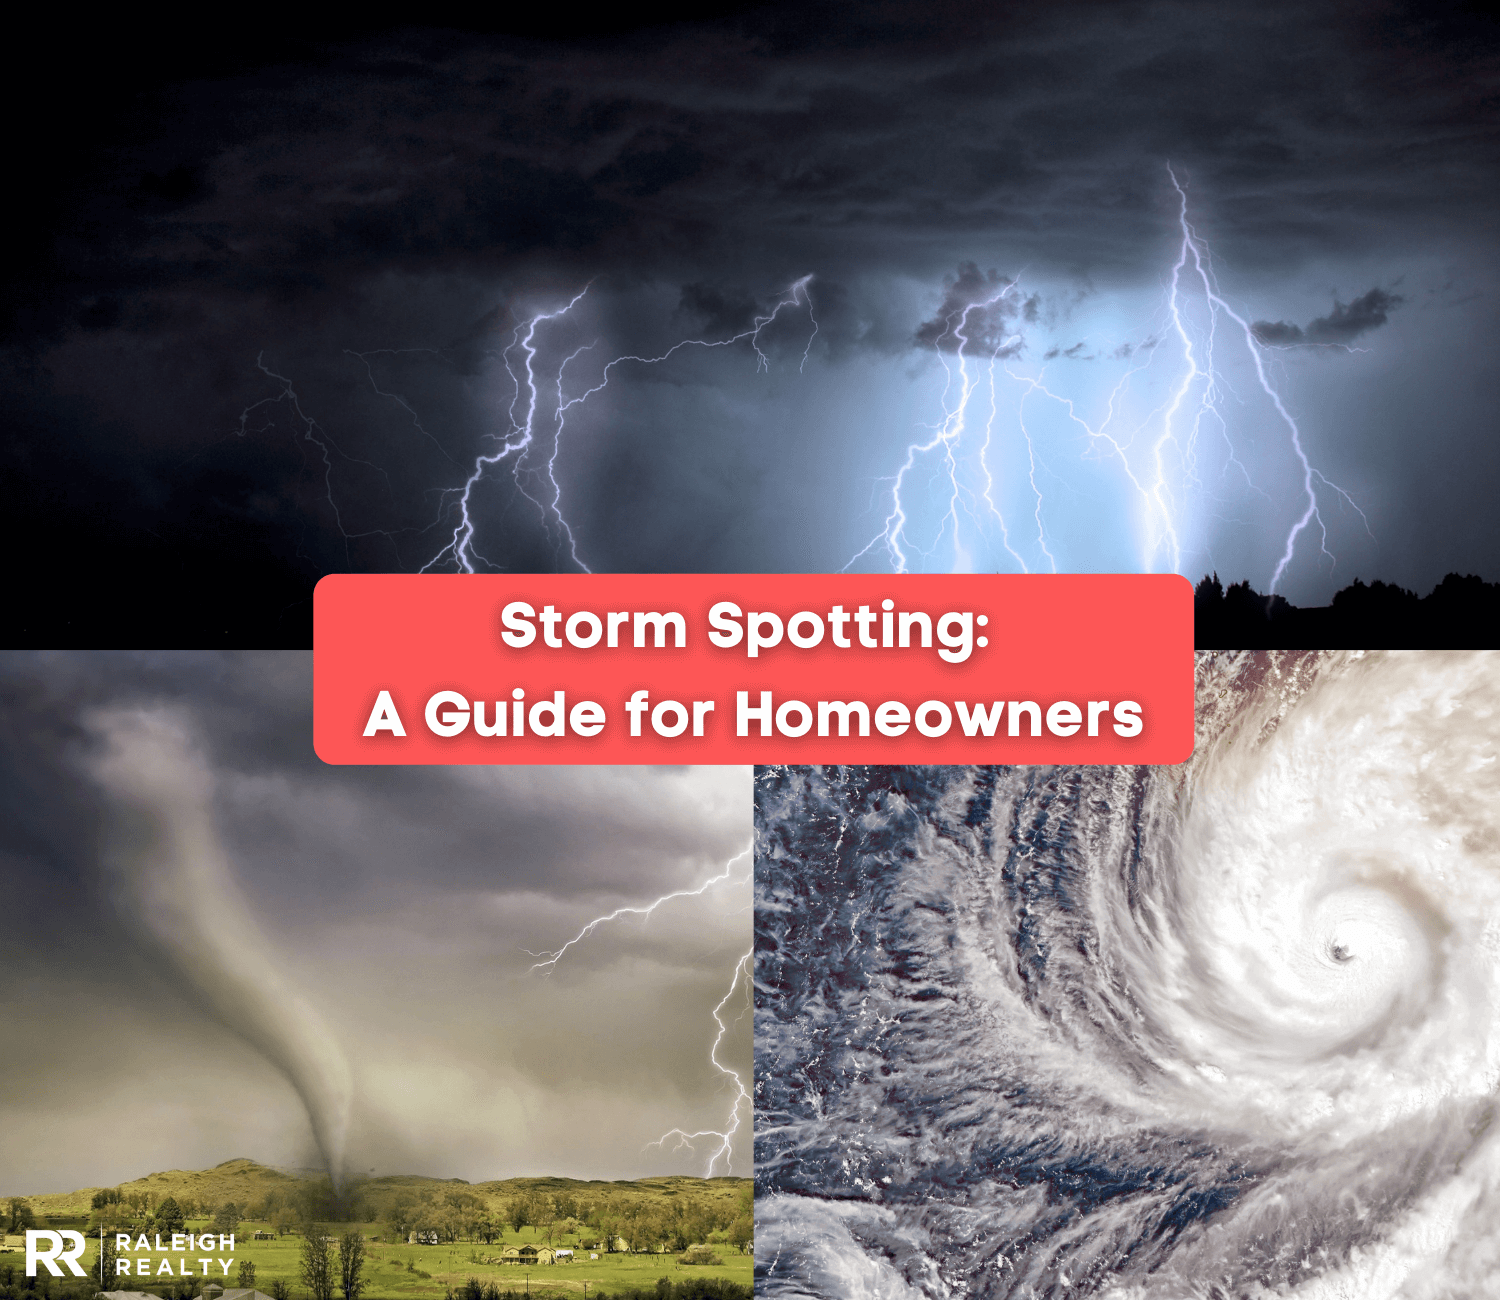 Storm Spotting: A Guide for Homeowners